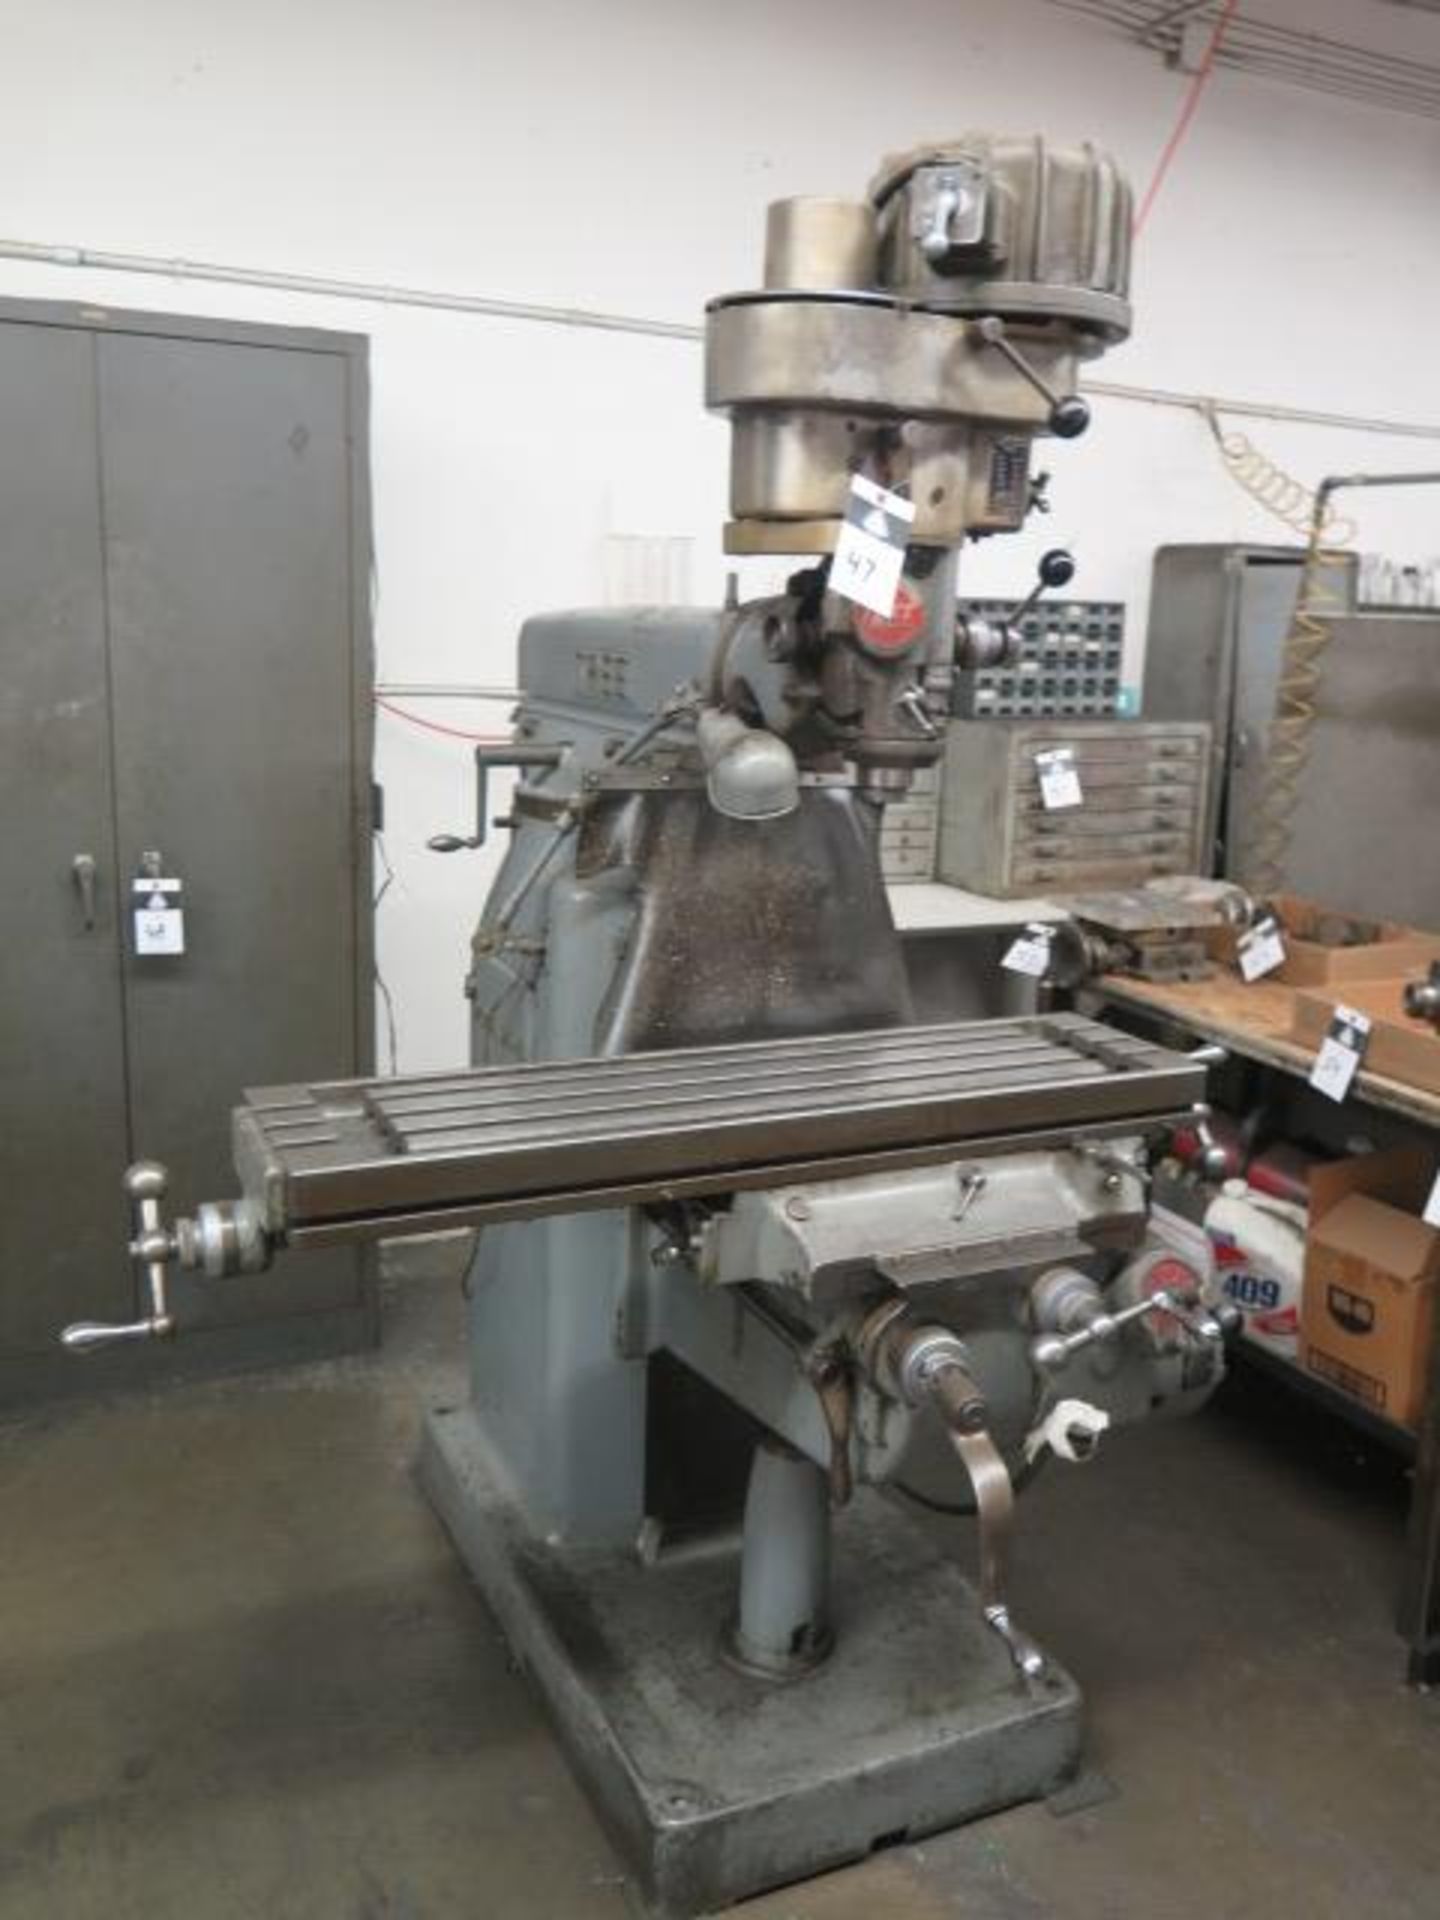 Tree 2UVR Vert Mill w/ 1.5Hp Motor, 60-3300 Dial Change RPM, Colleted Spindle, PF, SOLD AS IS - Image 2 of 8